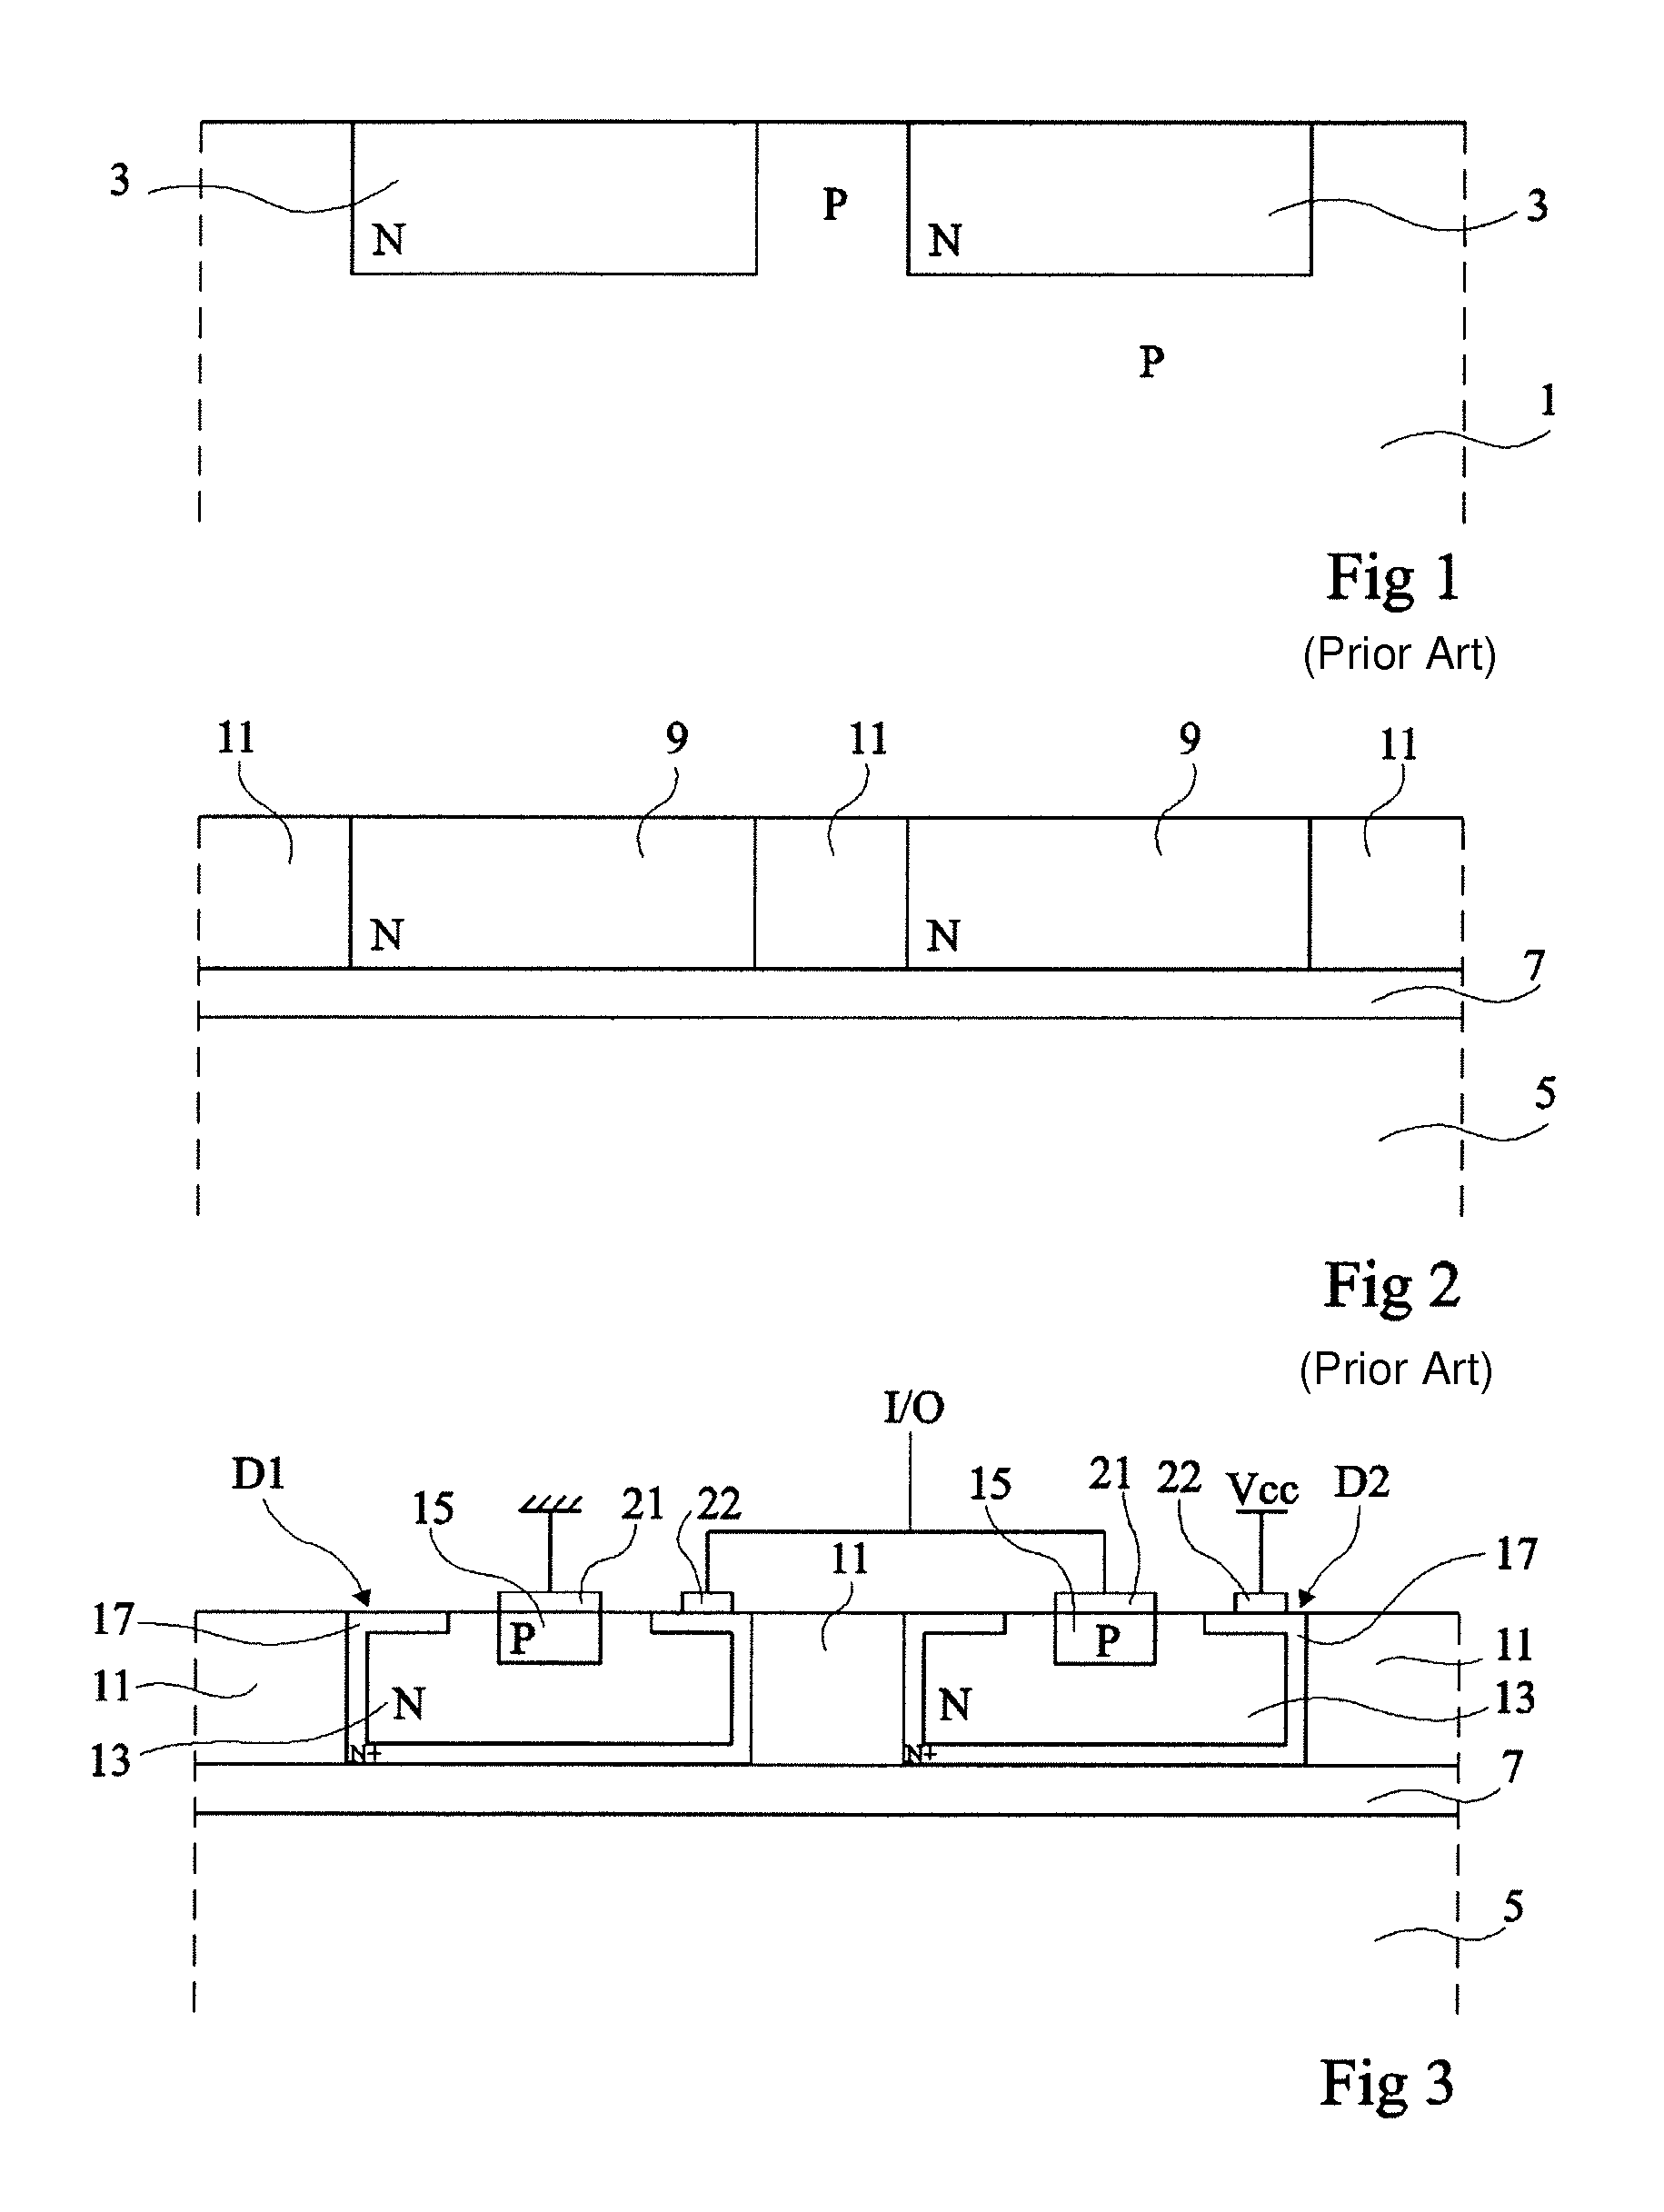 Structure of high-frequency components with low stray capacitances